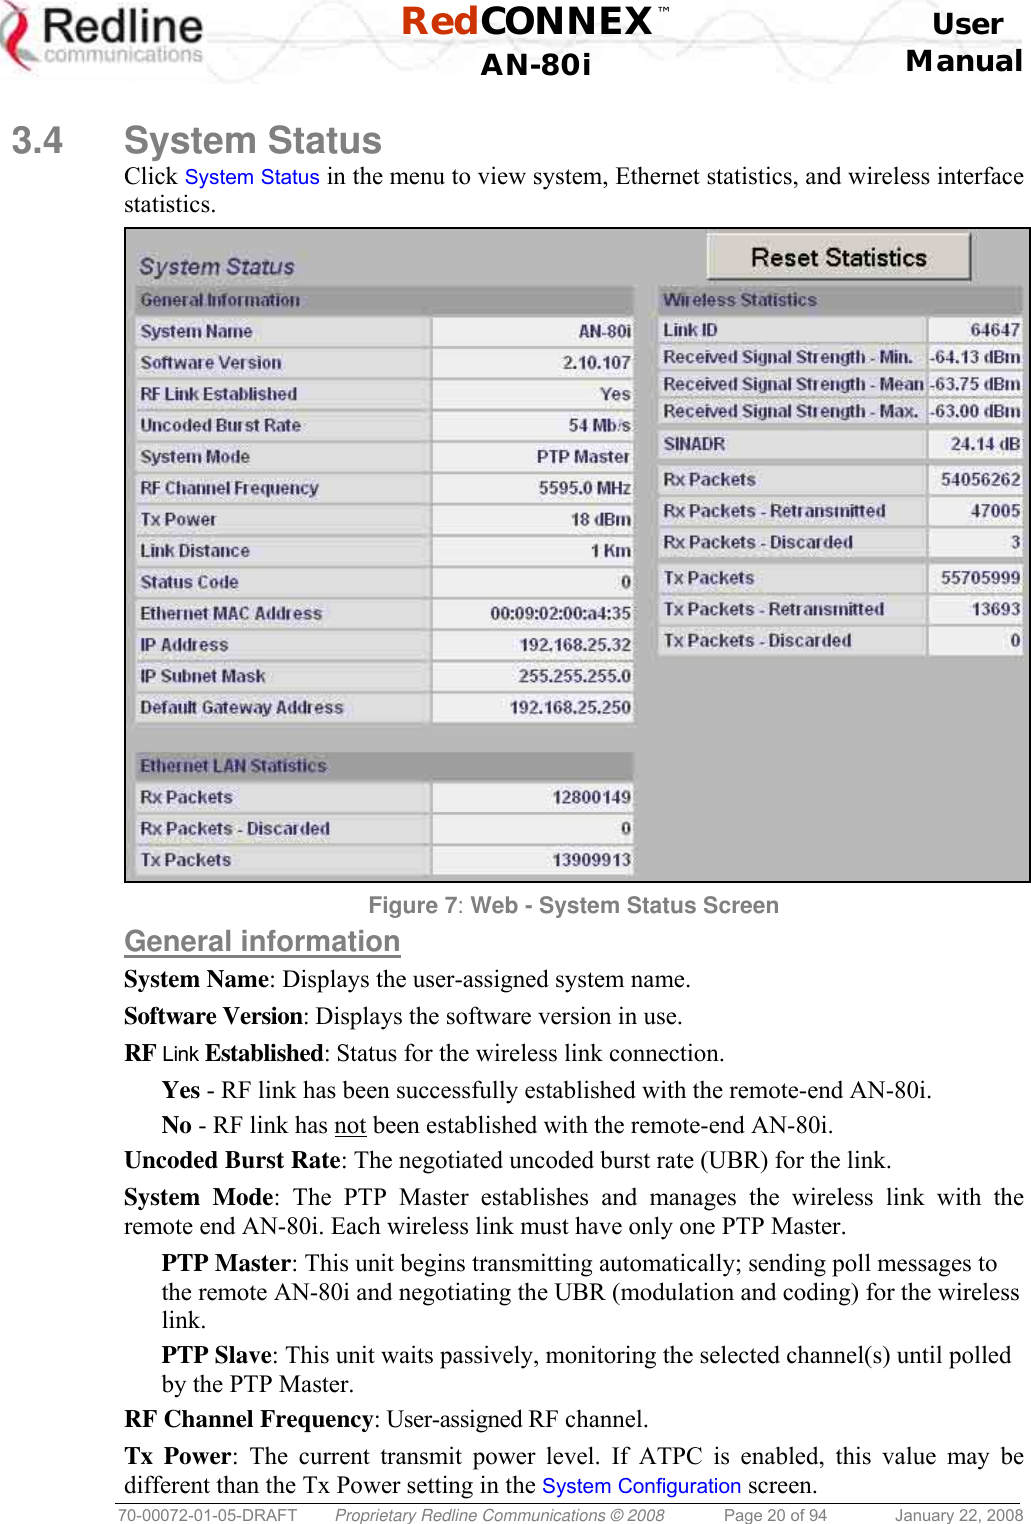  RedCONNEX™    User  AN-80i Manual  70-00072-01-05-DRAFT  Proprietary Redline Communications © 2008  Page 20 of 94  January 22, 2008  3.4 System Status Click System Status in the menu to view system, Ethernet statistics, and wireless interface statistics.  Figure 7: Web - System Status Screen General information System Name: Displays the user-assigned system name. Software Version: Displays the software version in use. RF Link Established: Status for the wireless link connection. Yes - RF link has been successfully established with the remote-end AN-80i. No - RF link has not been established with the remote-end AN-80i. Uncoded Burst Rate: The negotiated uncoded burst rate (UBR) for the link. System Mode: The PTP Master establishes and manages the wireless link with the remote end AN-80i. Each wireless link must have only one PTP Master. PTP Master: This unit begins transmitting automatically; sending poll messages to the remote AN-80i and negotiating the UBR (modulation and coding) for the wireless link. PTP Slave: This unit waits passively, monitoring the selected channel(s) until polled by the PTP Master. RF Channel Frequency: User-assigned RF channel. Tx Power: The current transmit power level. If ATPC is enabled, this value may be different than the Tx Power setting in the System Configuration screen. 